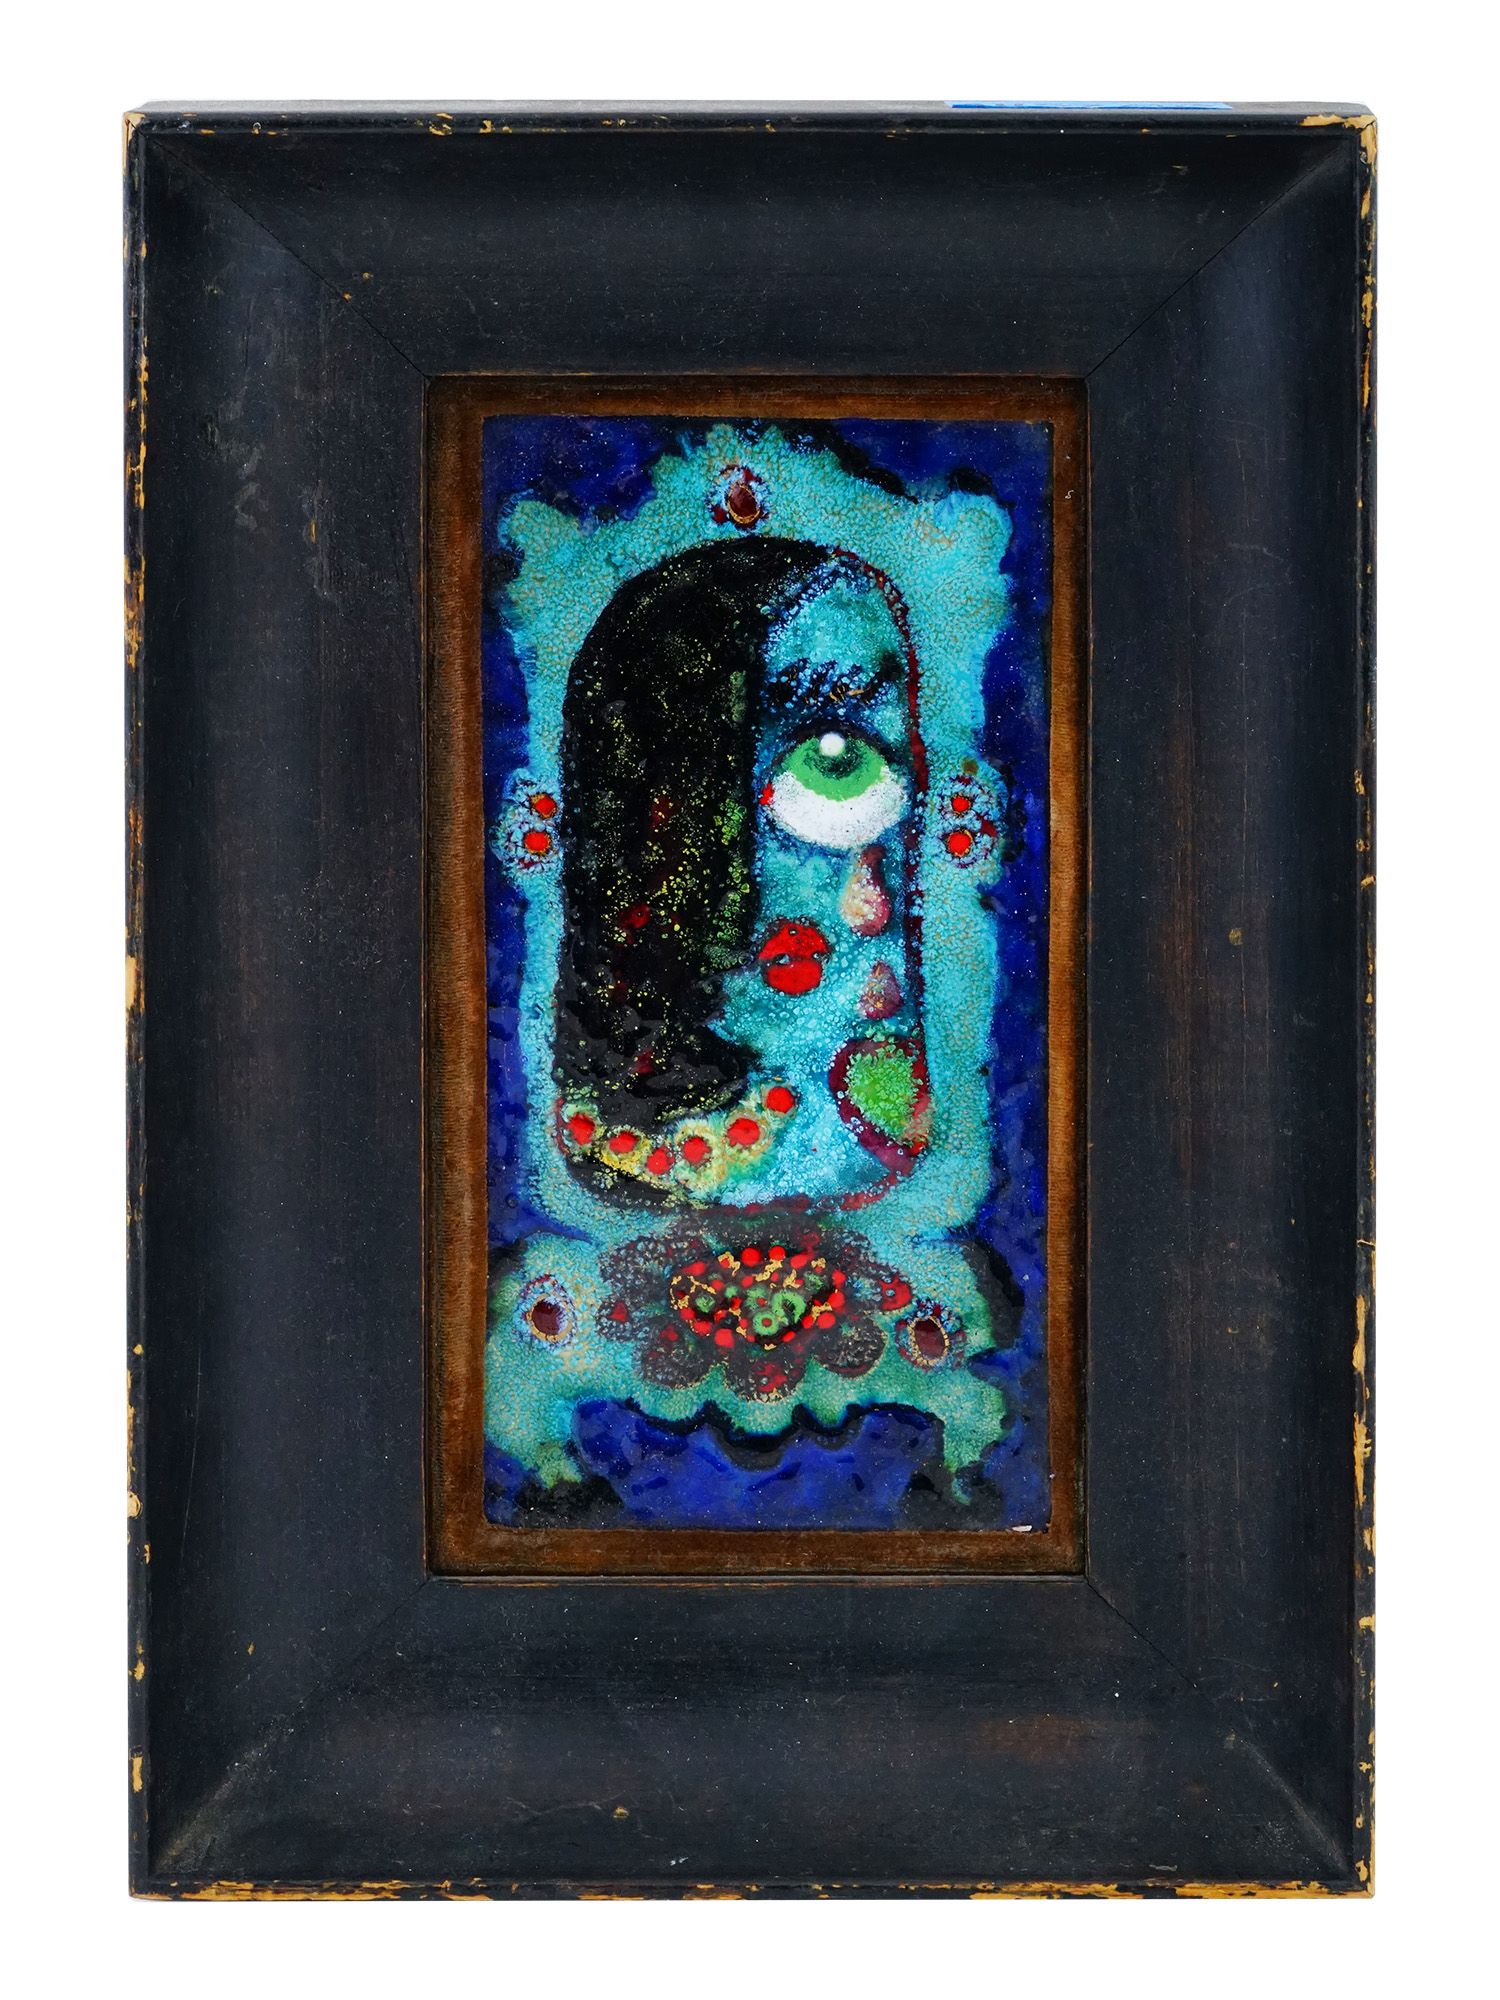 ENAMEL ON COPPER ARTWORK TITLED MIRIAM ON THE WILD PIC-0